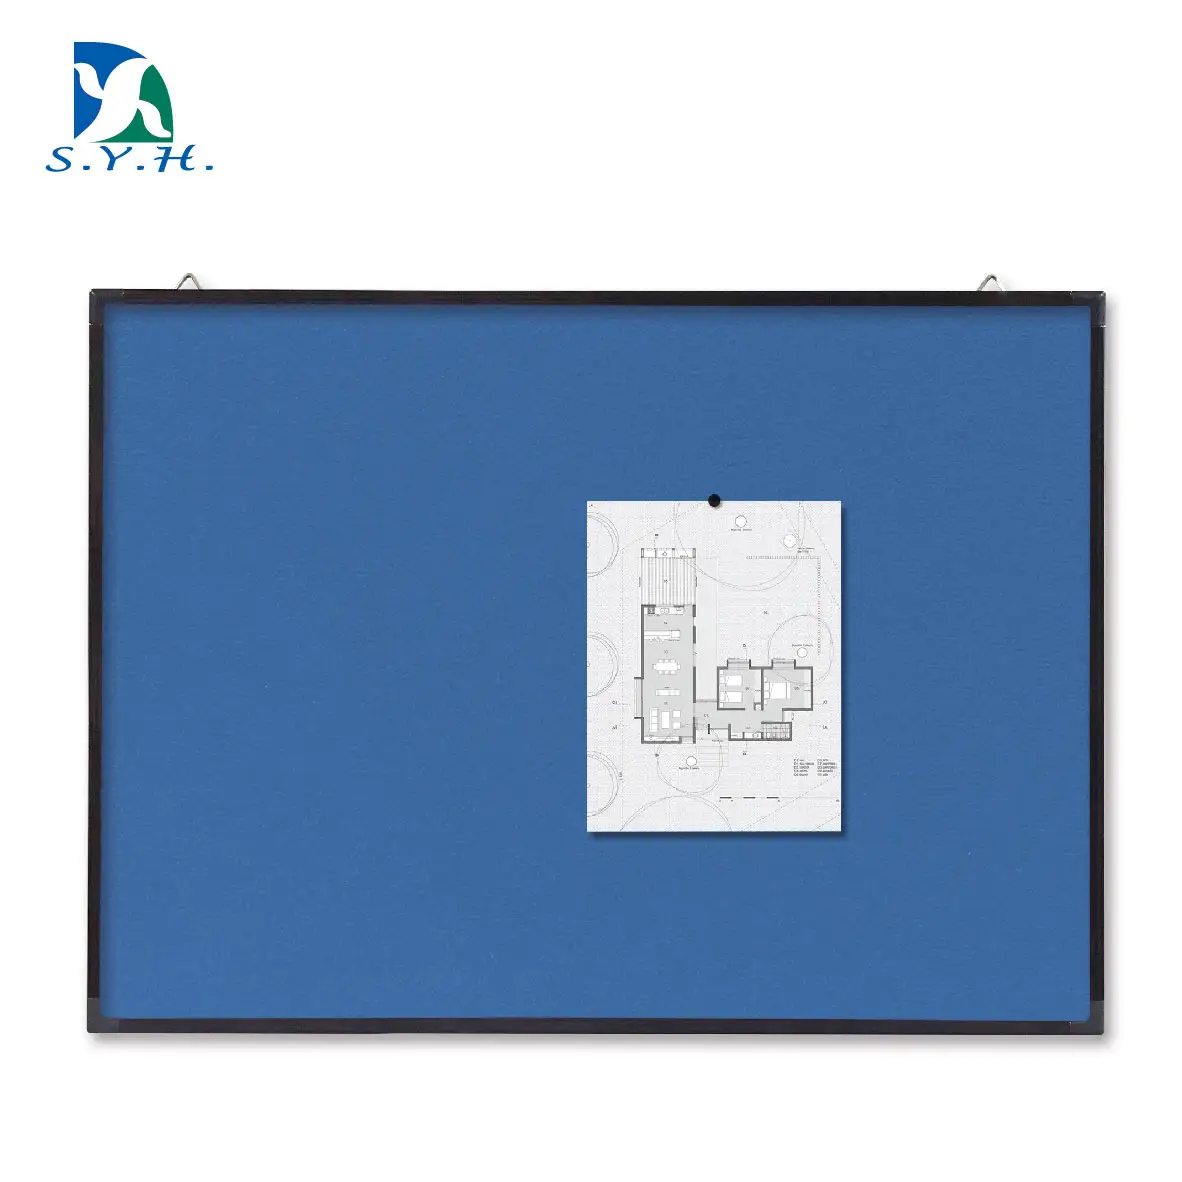 Exquisite blue felt fabric bulletin memo board for home or office